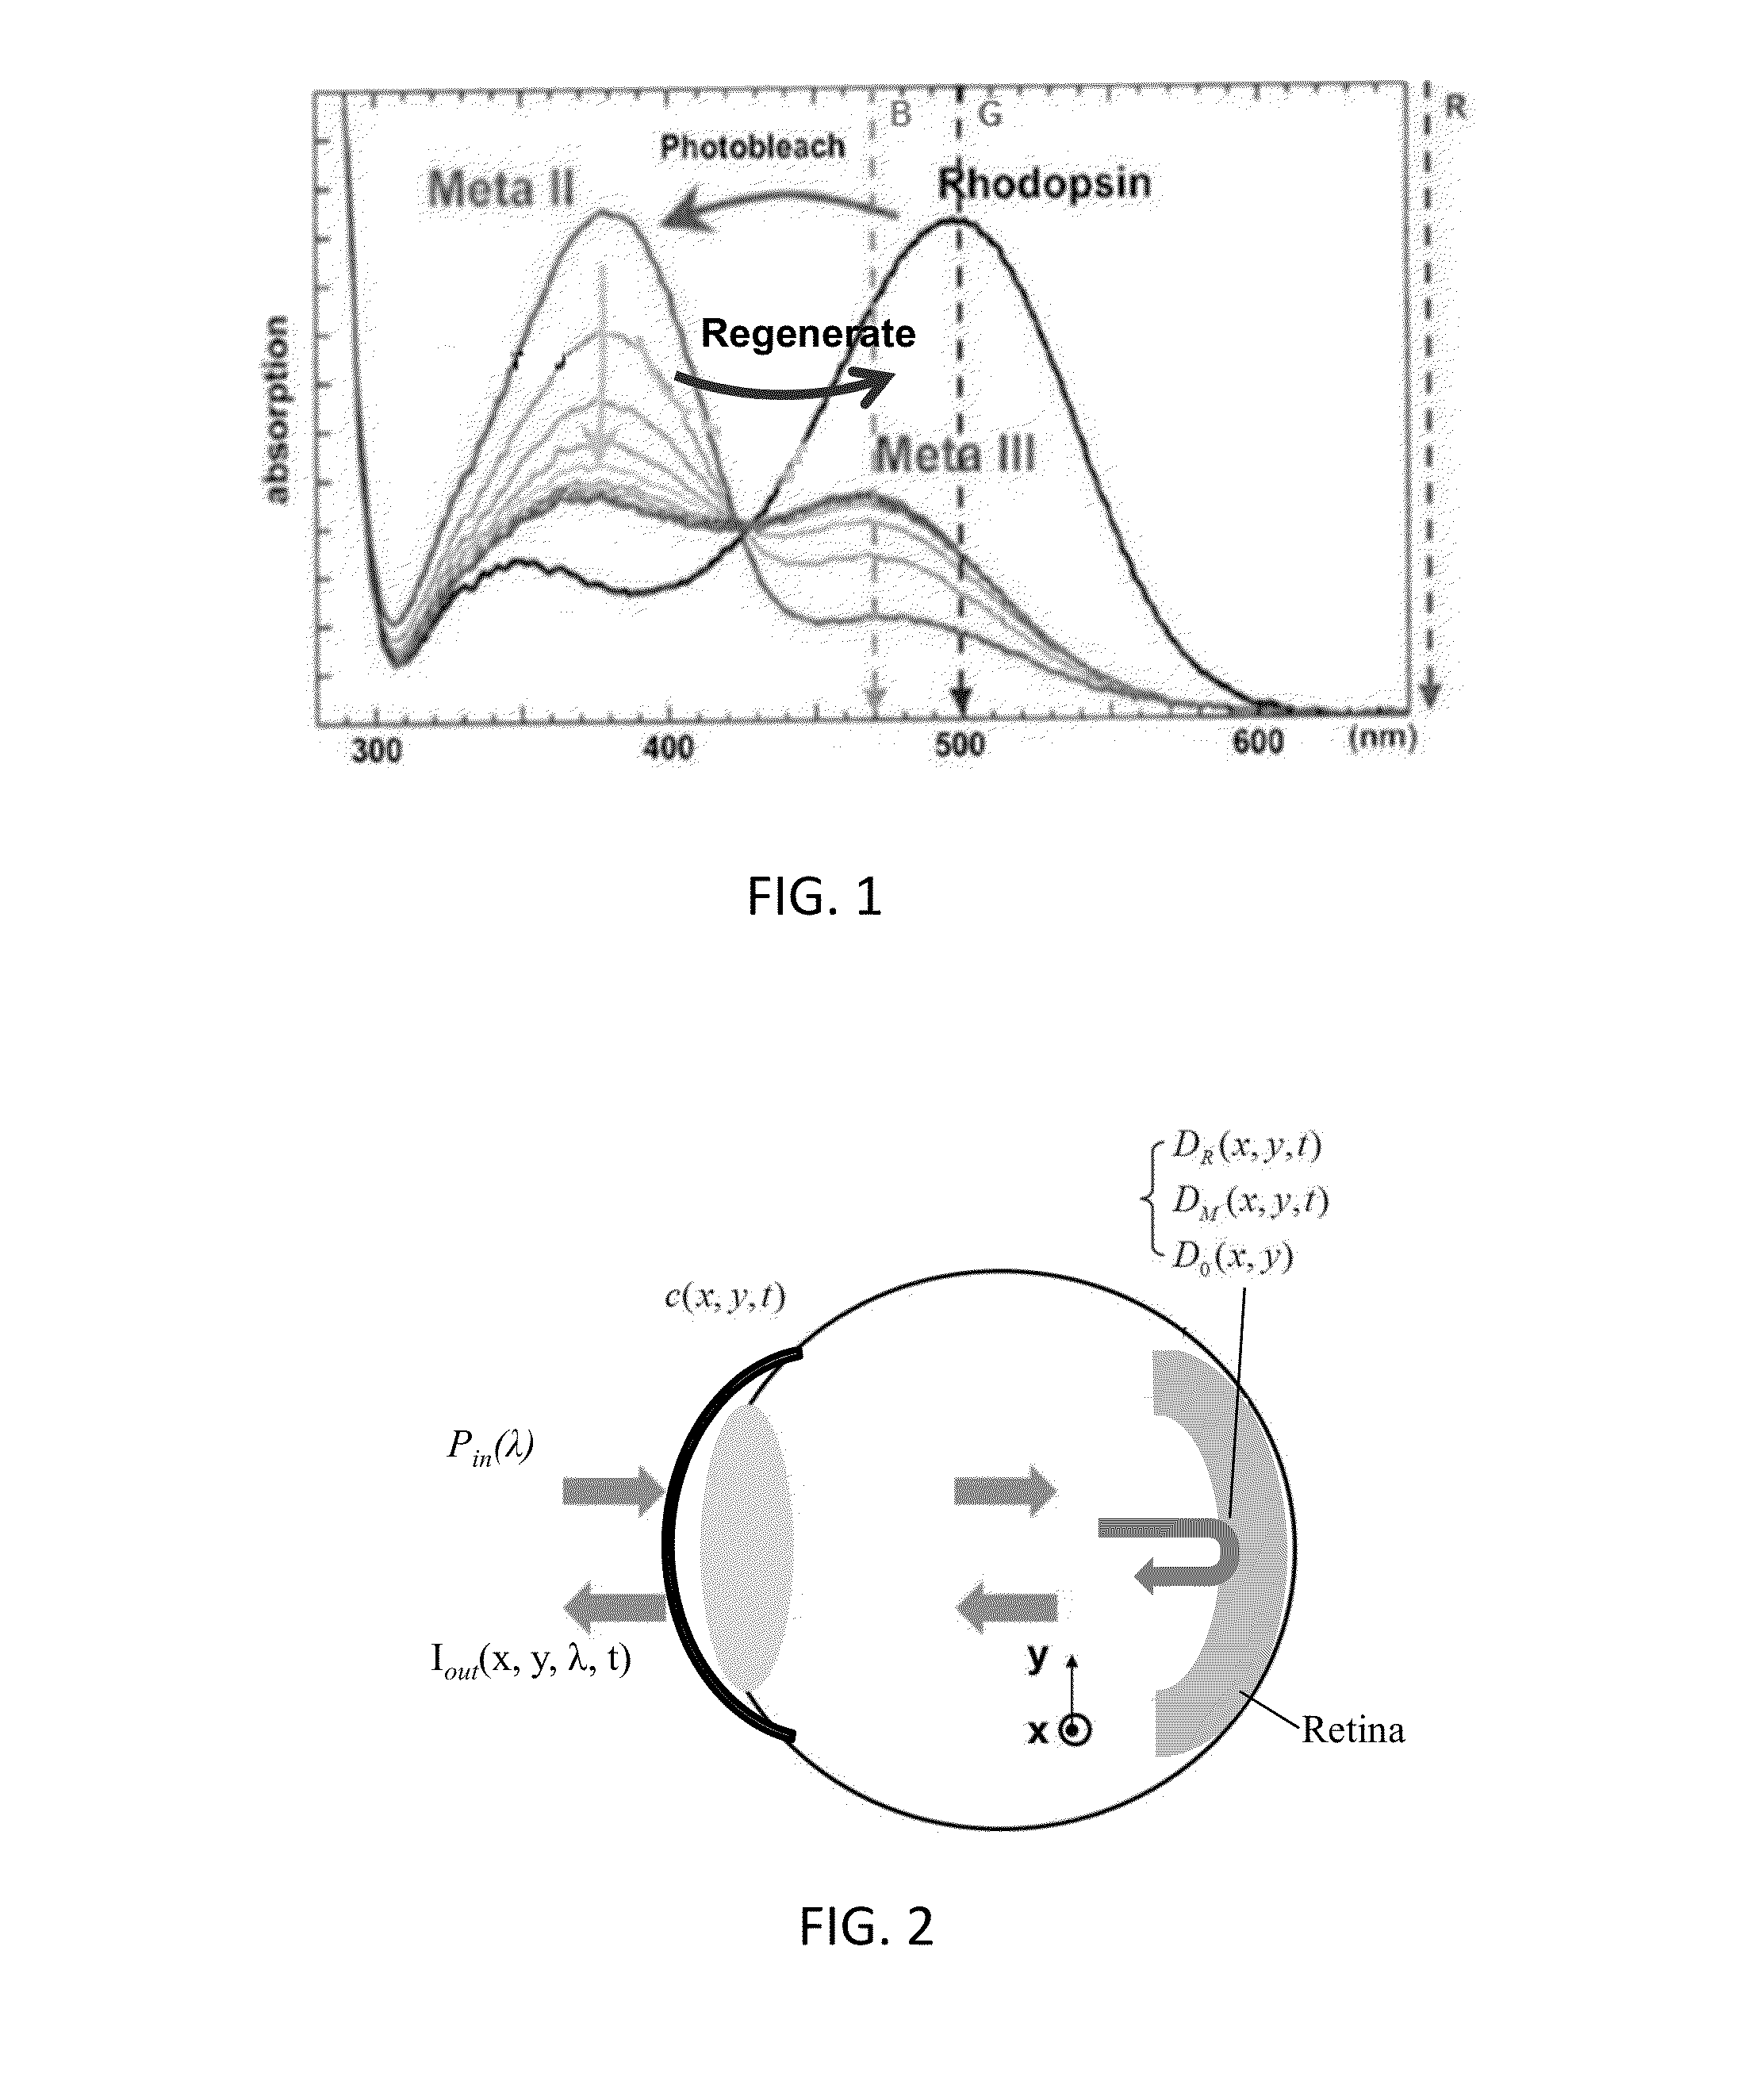 Systems and methods for noninvasive analysis of retinal health and function